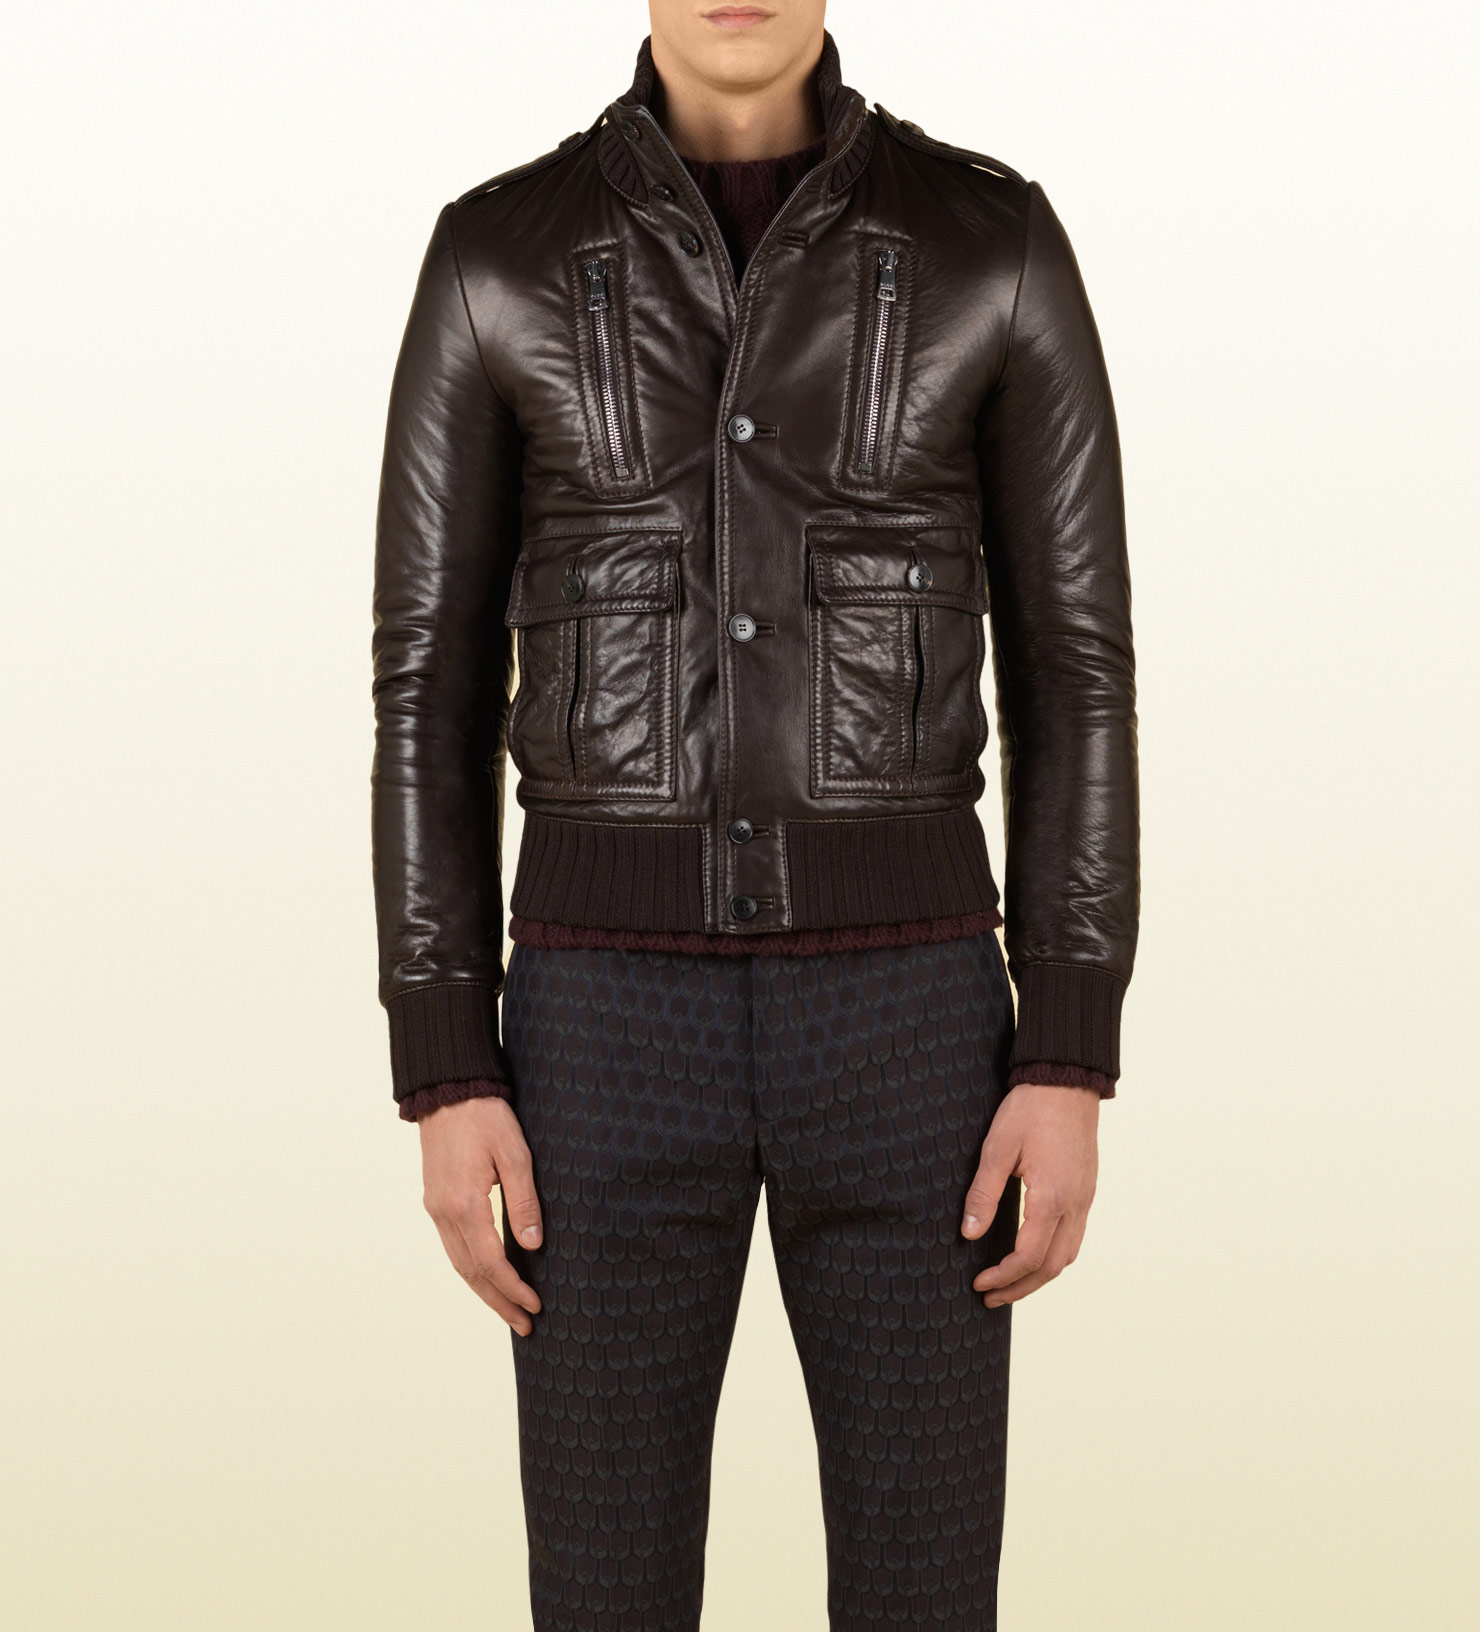 Gucci Leather Biker Jacket with Shearling Collar in Brown for Men - Lyst